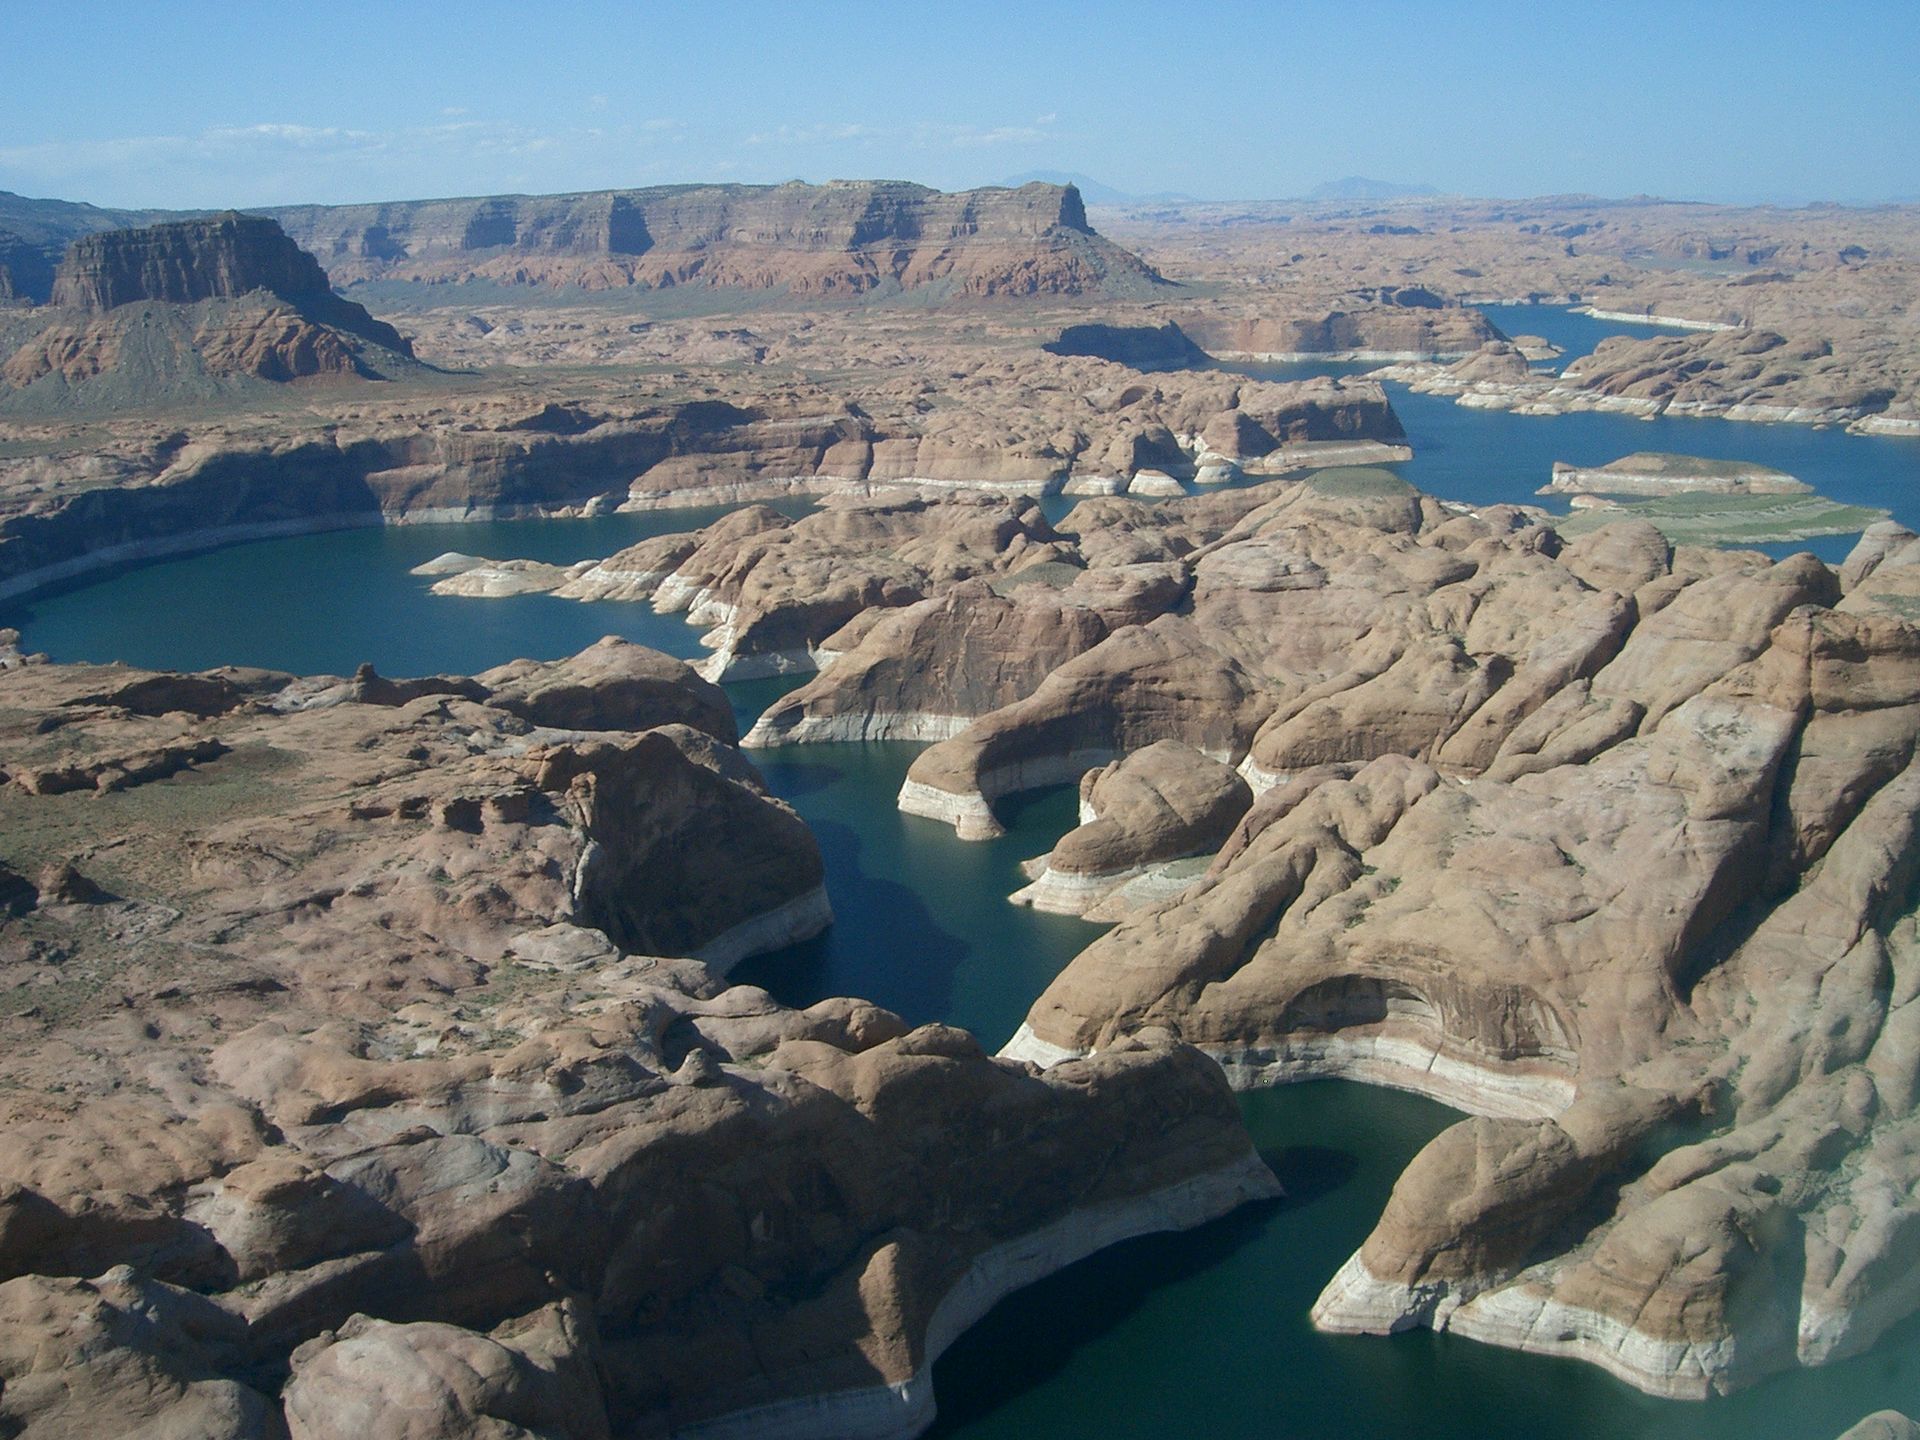 Lake Powell Utah, USA (from plane). Note the prominent "bathtub ring" made visible by low water